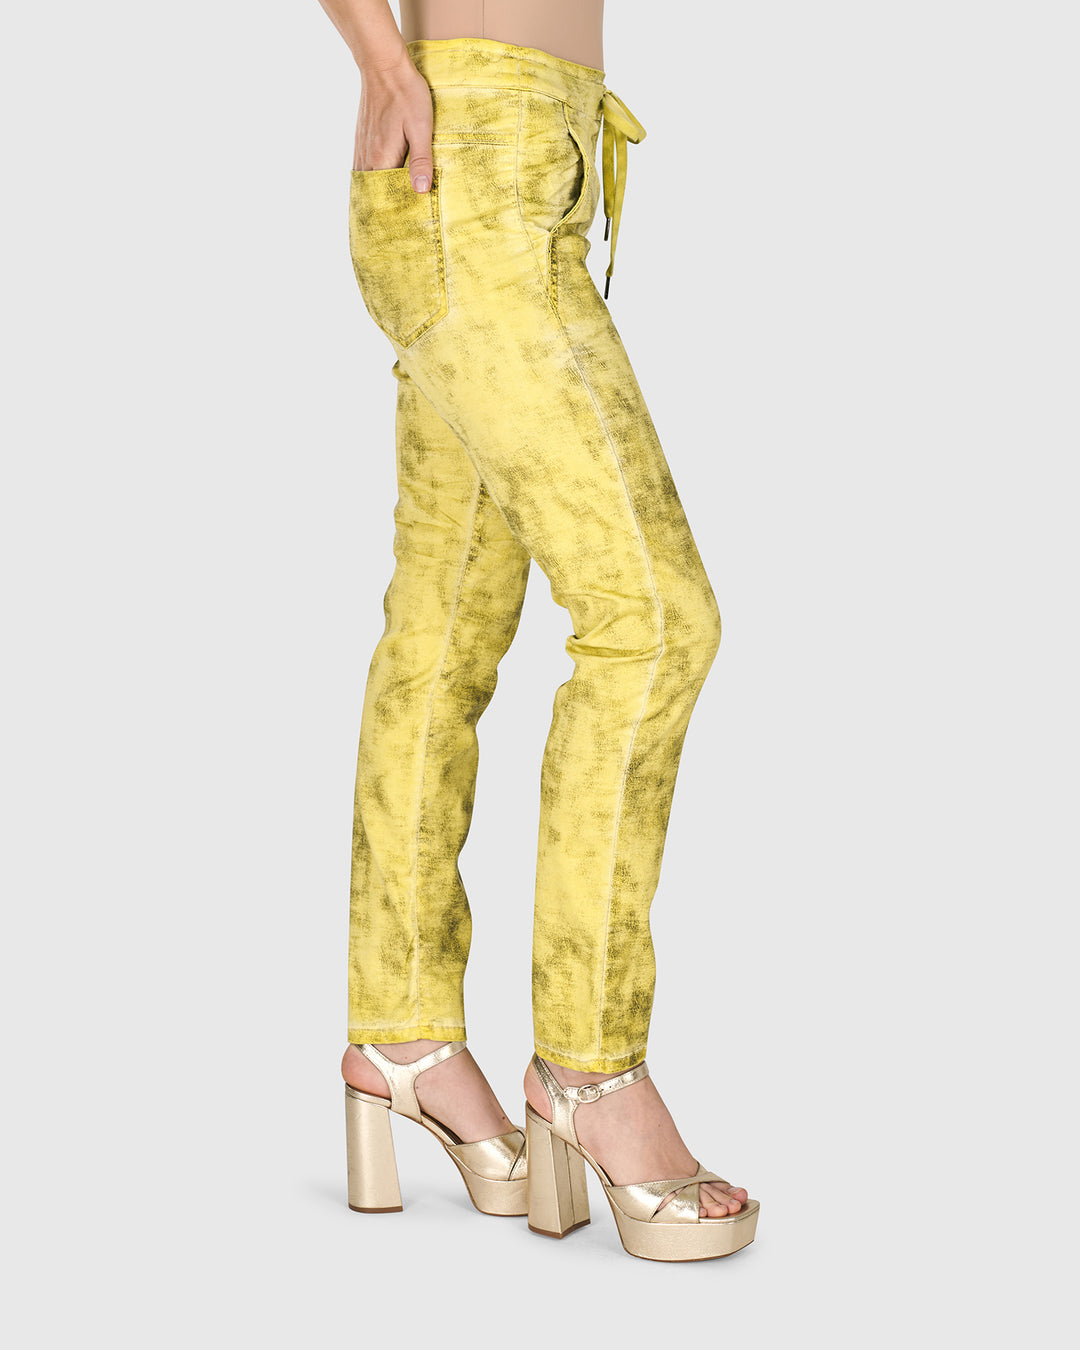 Iconic Stretch Jeans, Citron